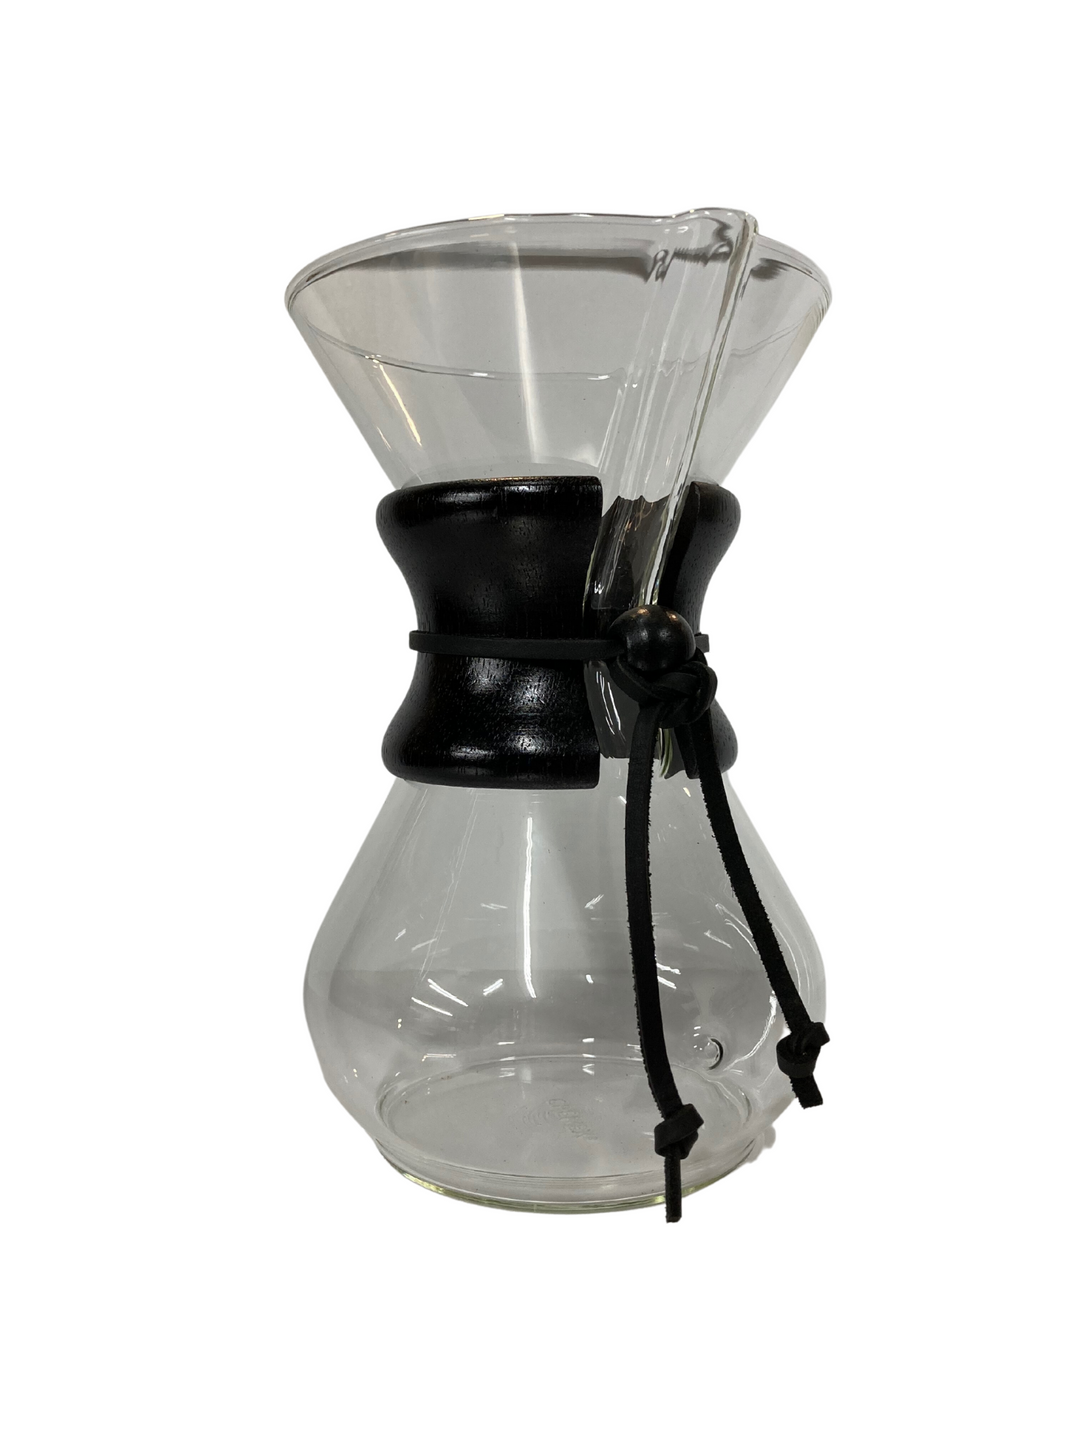 Limited Edition Bodum Pour Over Coffee Maker, Black